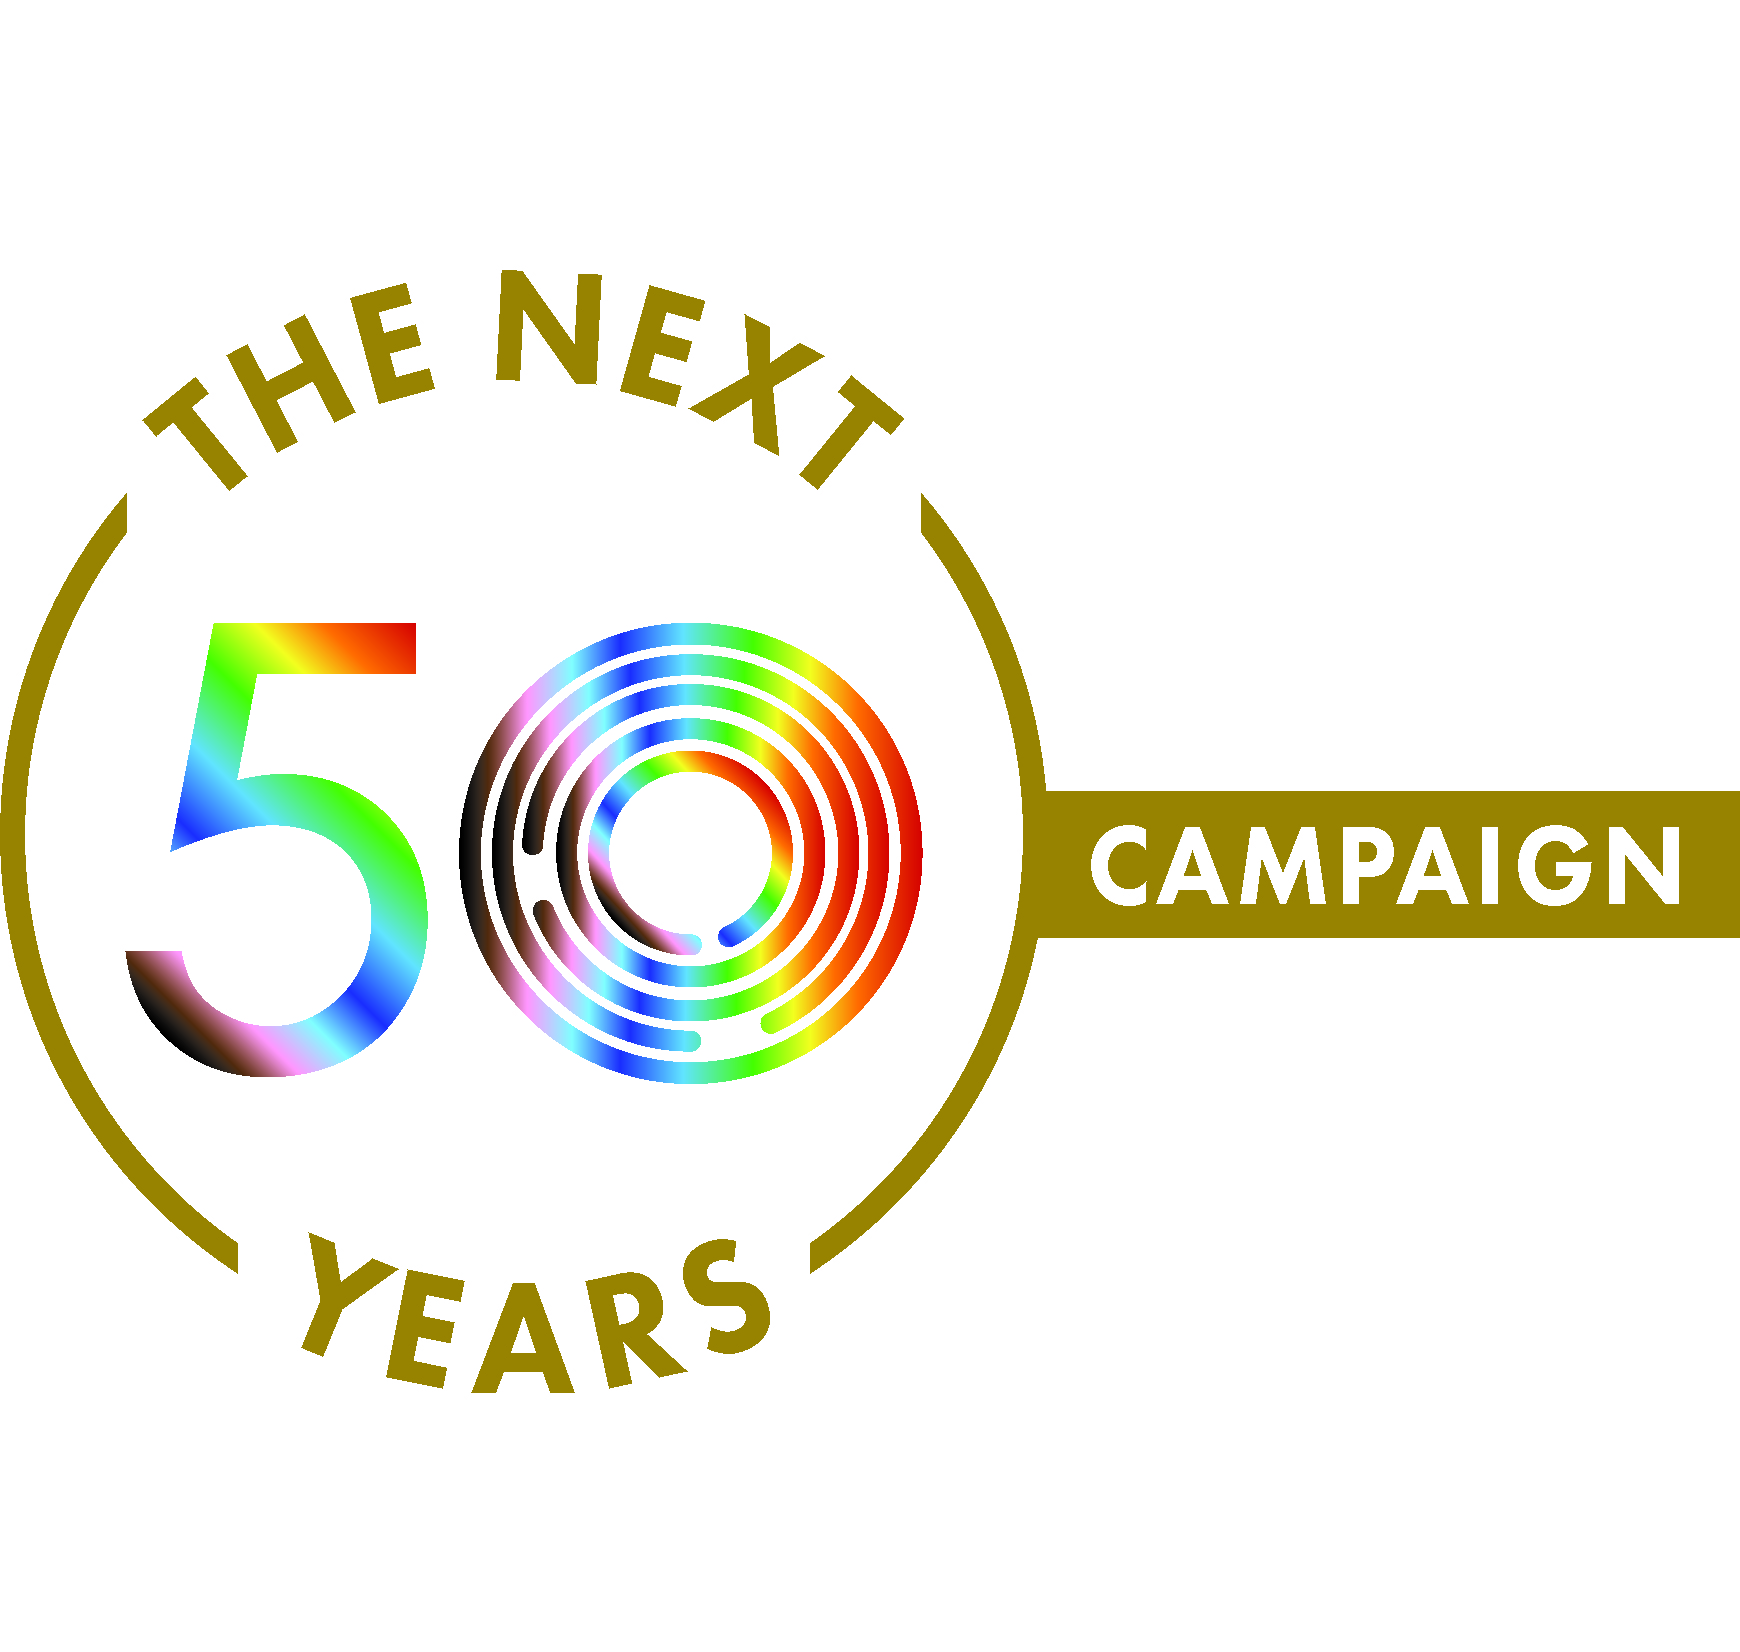 A logo of MCC Toronto's Year End Appeal, with a big number 5o in the middle and text saying The next 50 years Campaign